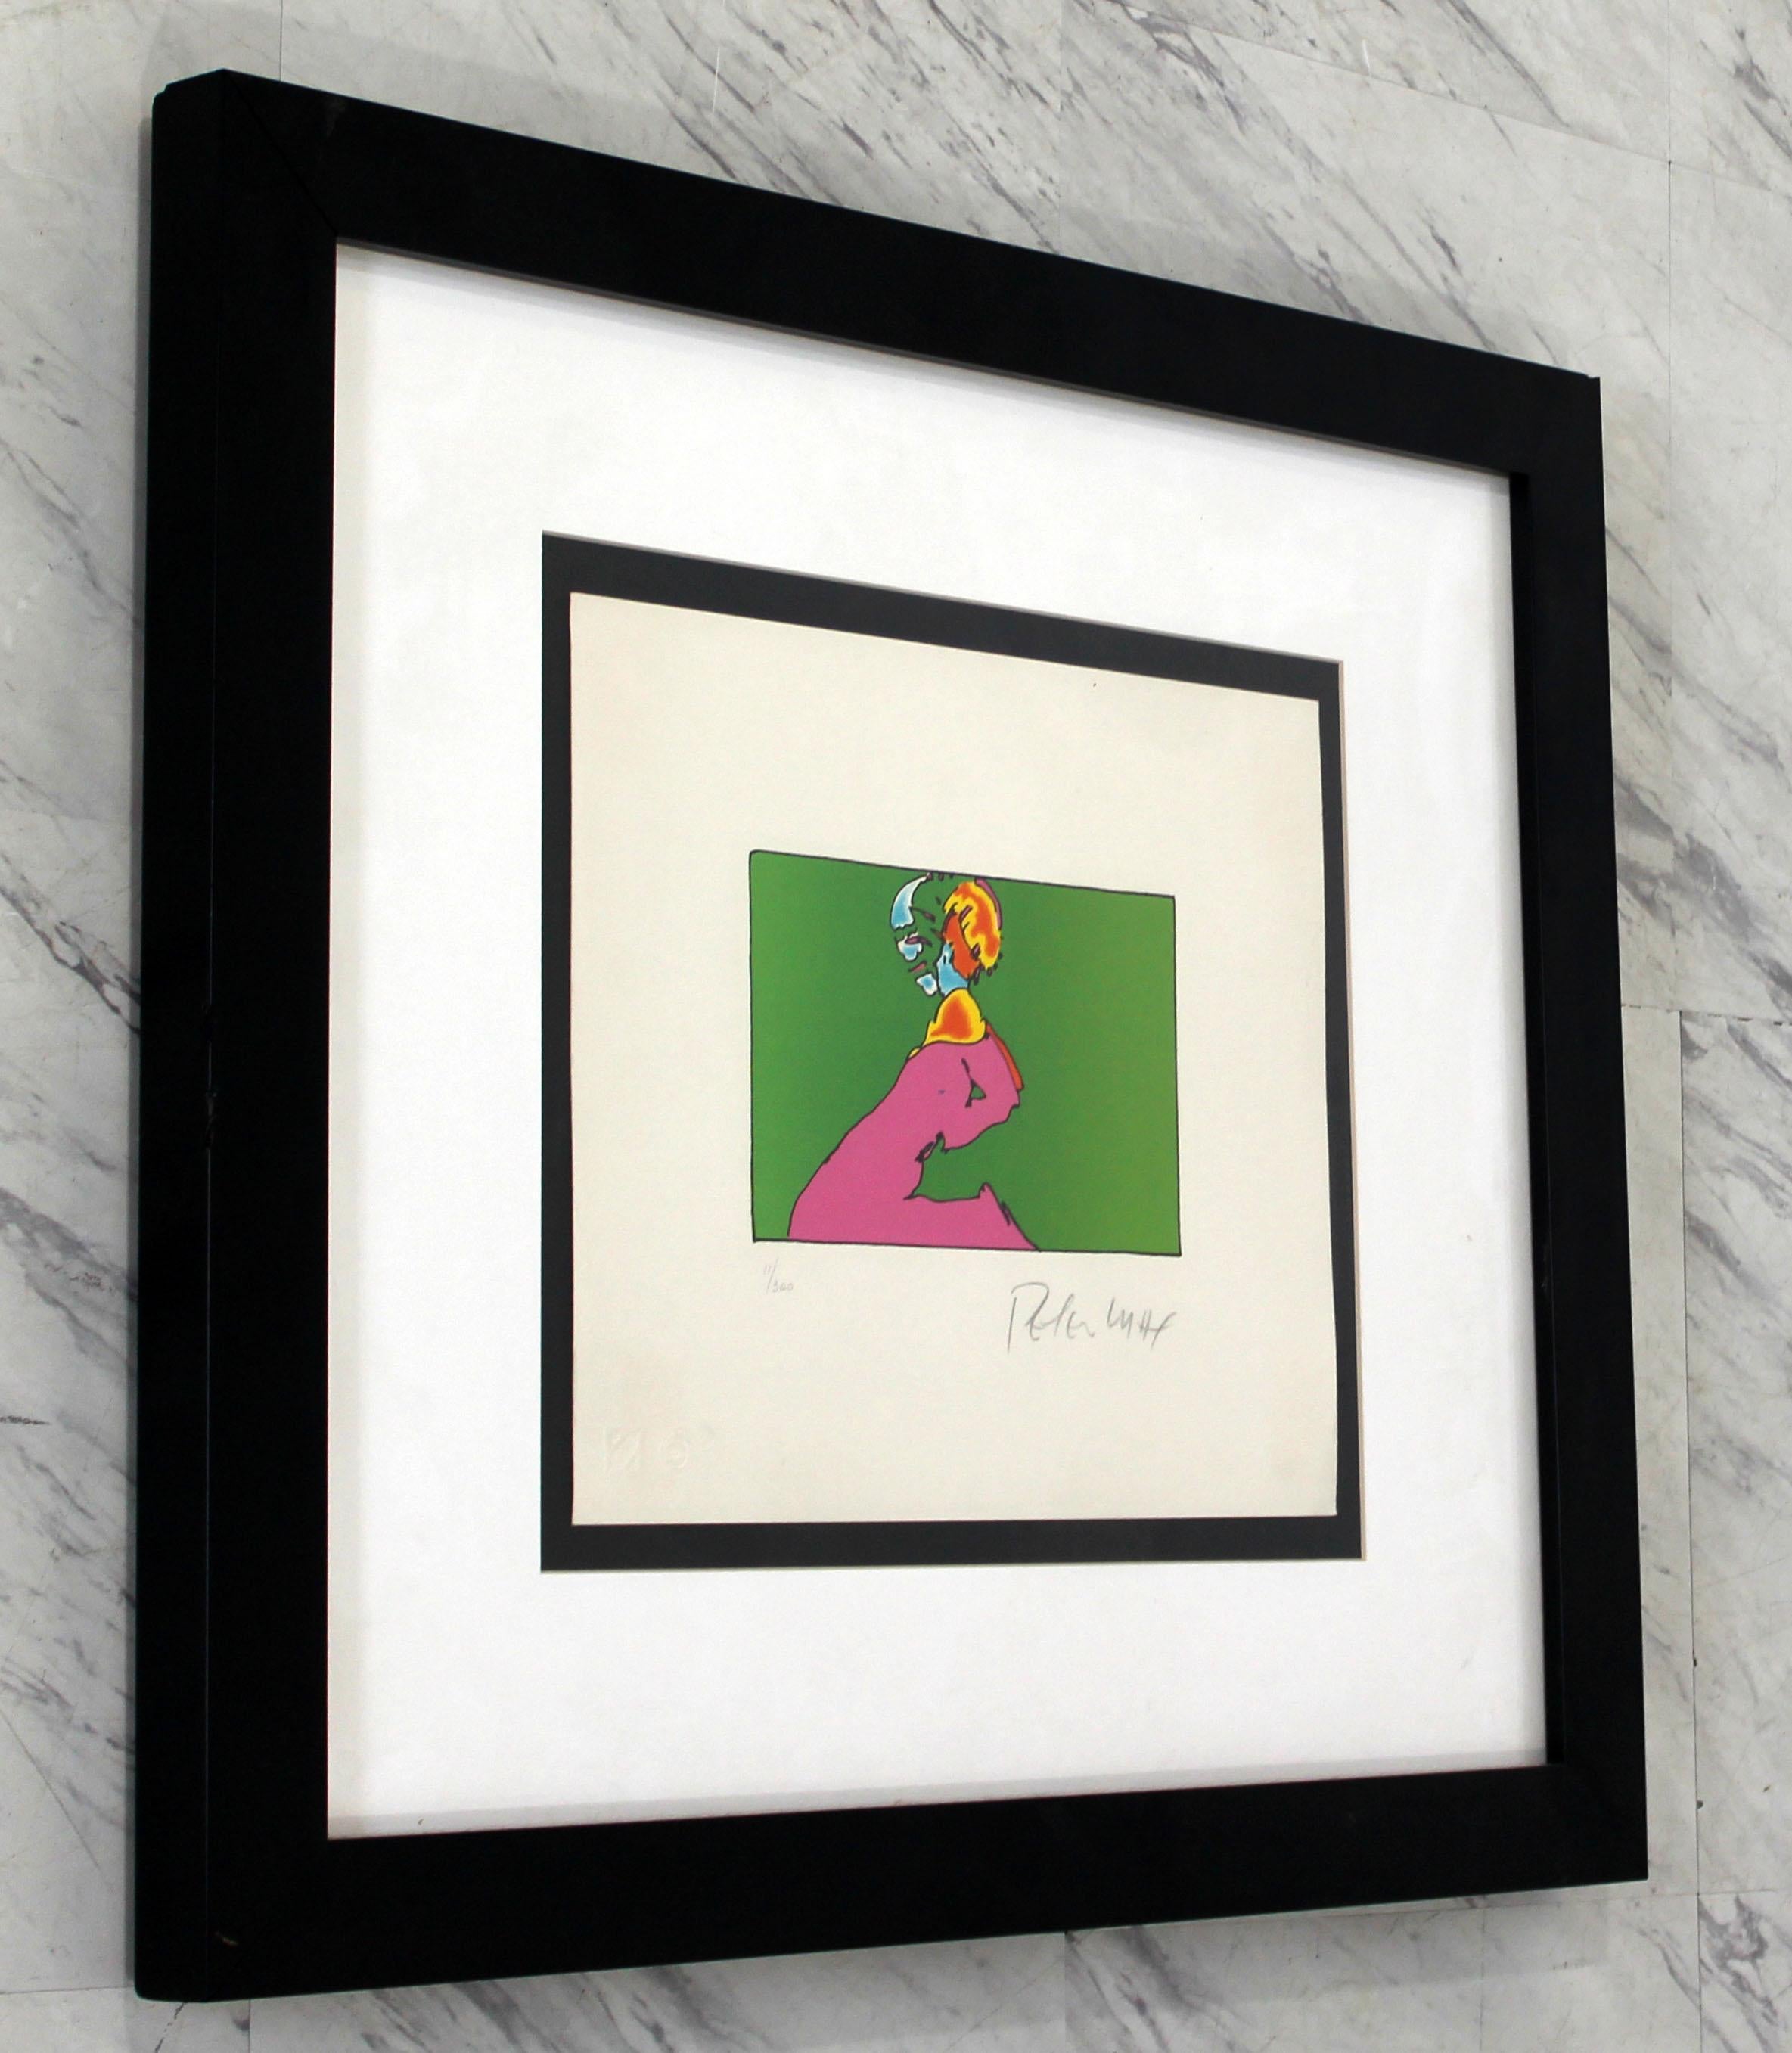 American Mid-Century Modern Framed Peter Max Lithograph Signed 11/300 